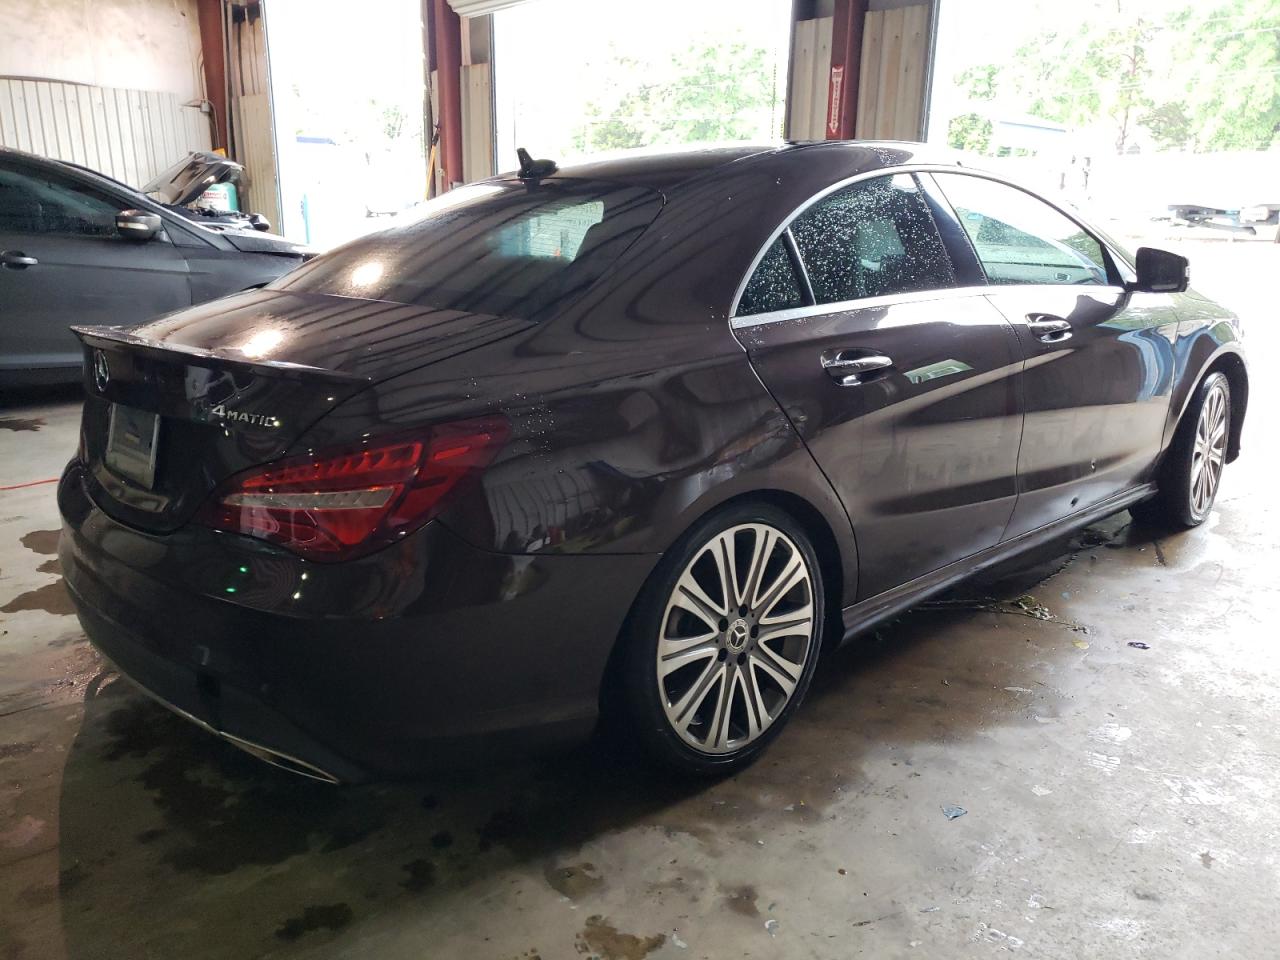 WDDSJ4GB1JN****** Salvage and Repairable 2018 Mercedes-Benz CLA-Class in AL - Eight Mile